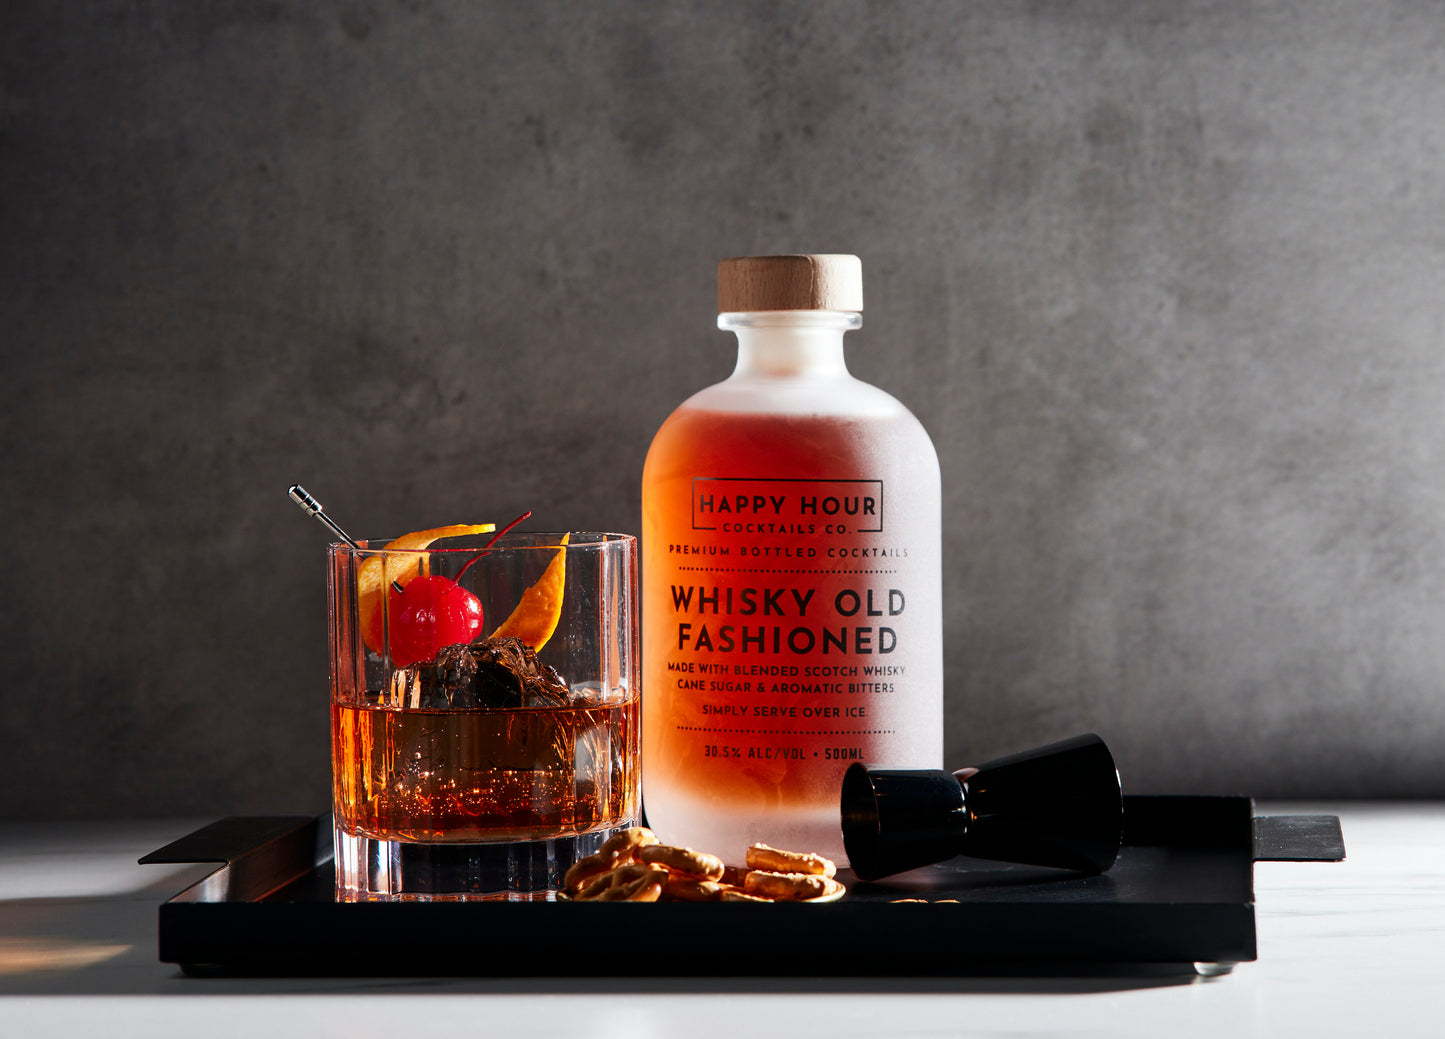 WHISKY OLD FASHIONED